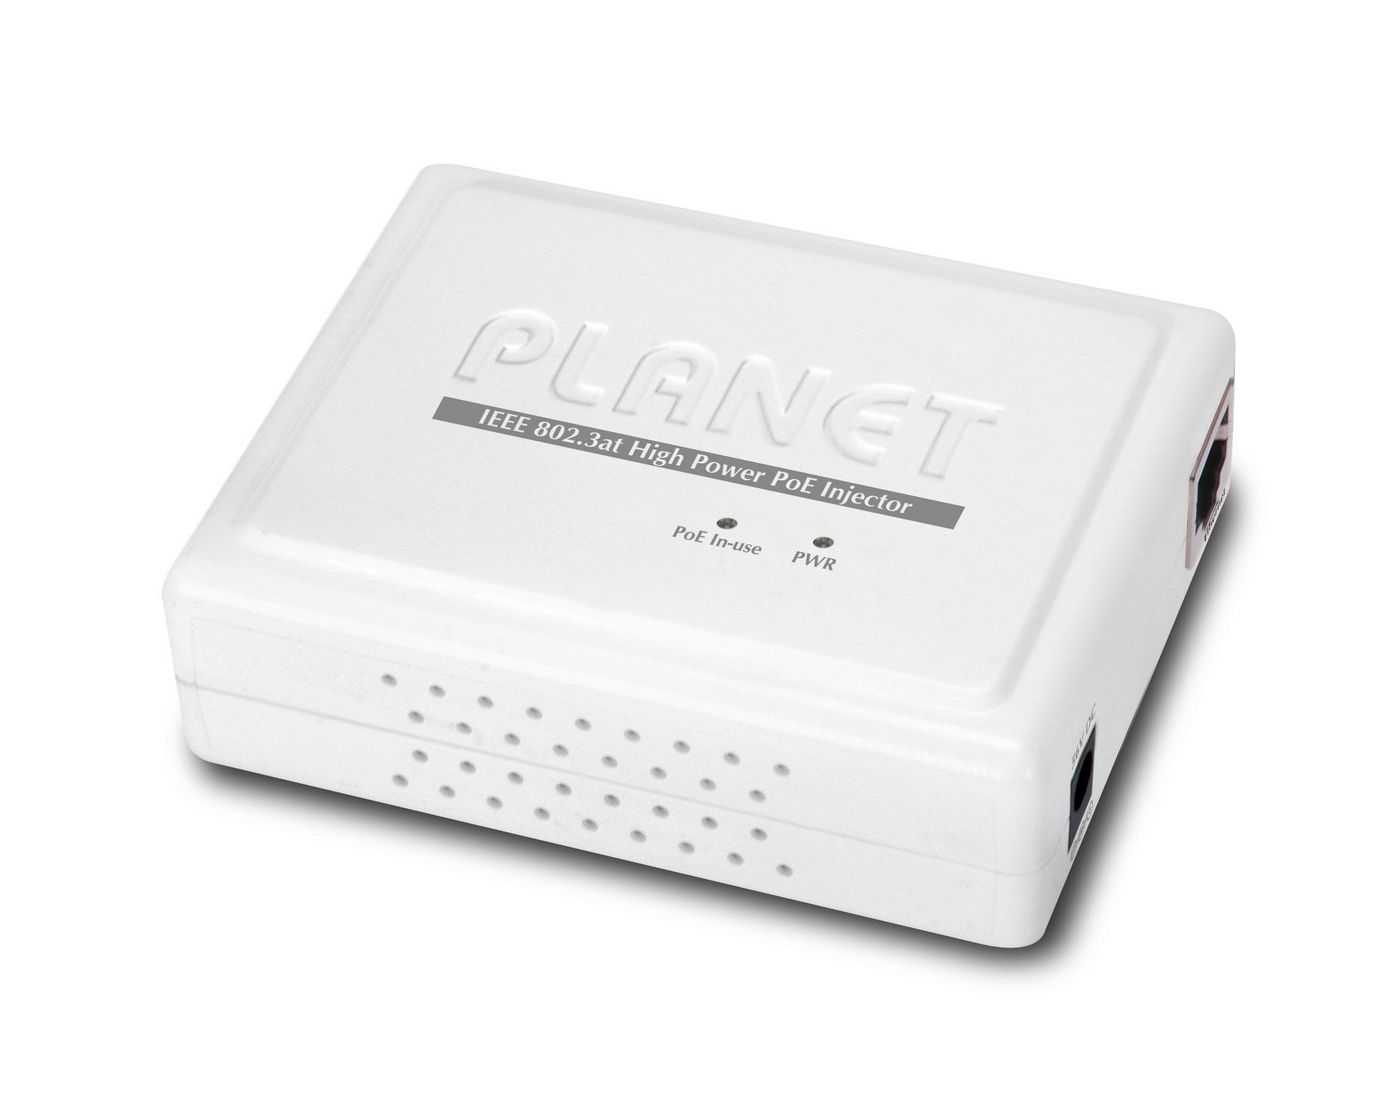 Planet POE-161-UK IEEE802.3at High Power PoE 